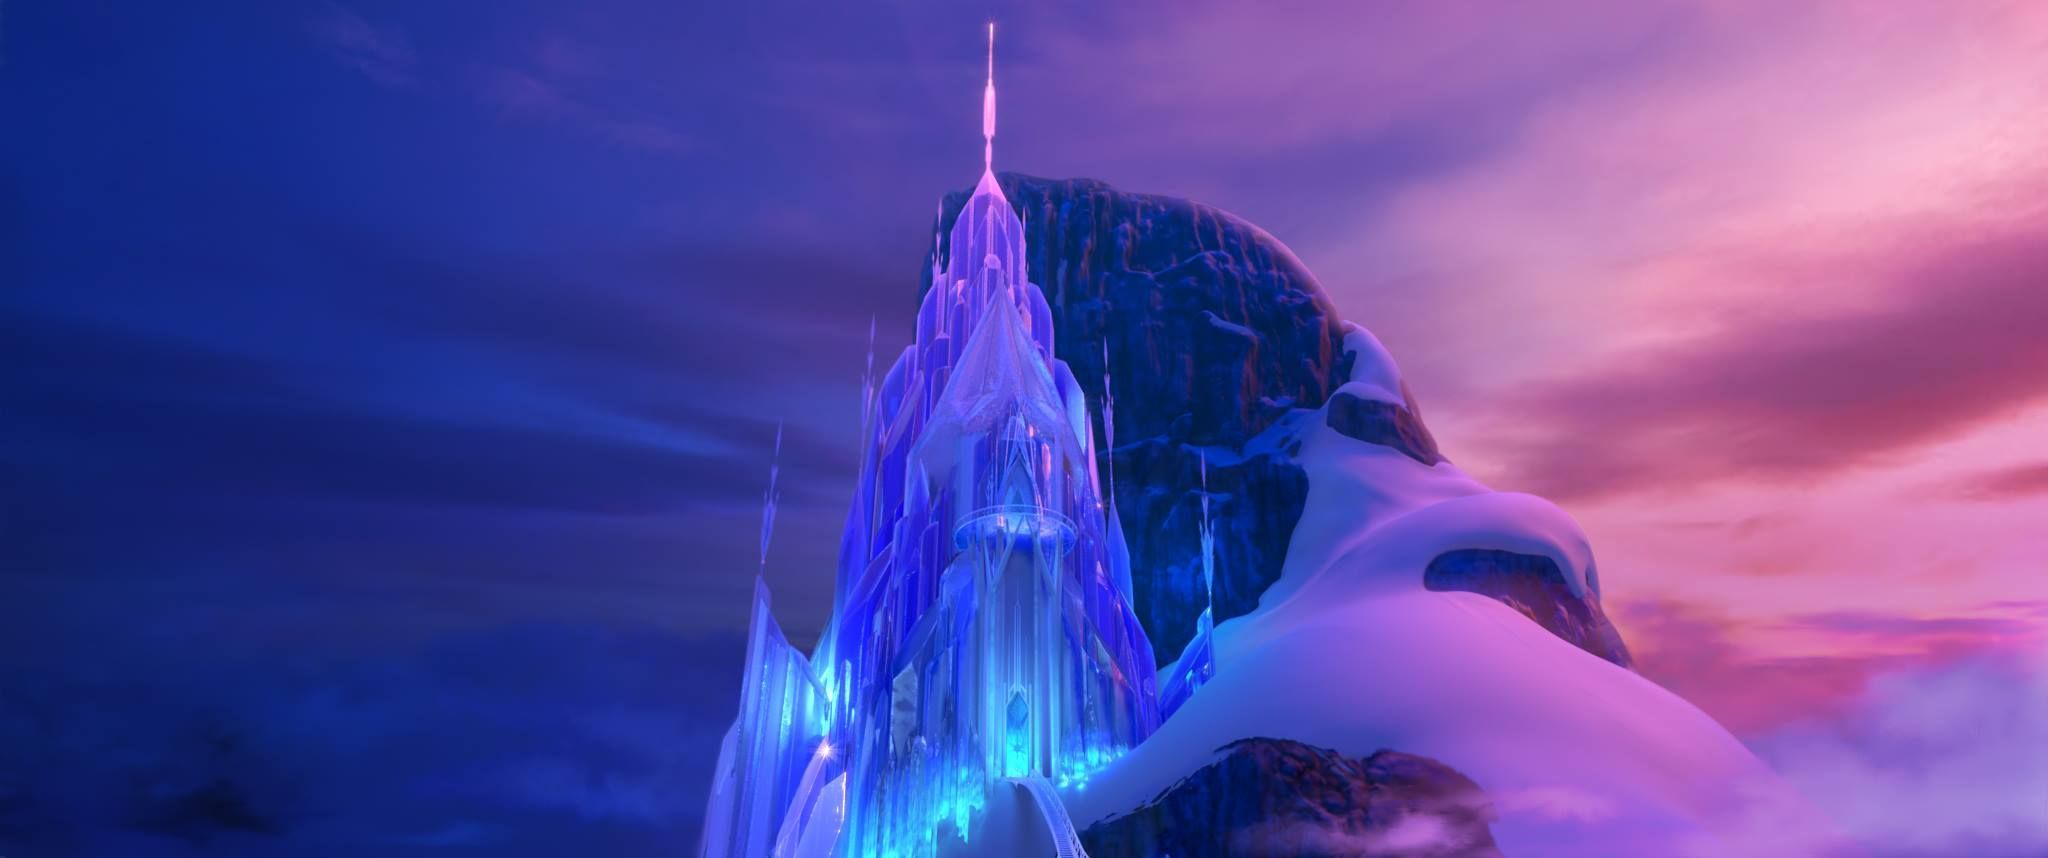 Review: Frozen Shatters Princess Stereotypes With A Beautiful And Funny Adventure That's A Sure Fire Disney Classic. Inside The Magic. Frozen Image, Frozen Movie, Ice Castle Frozen